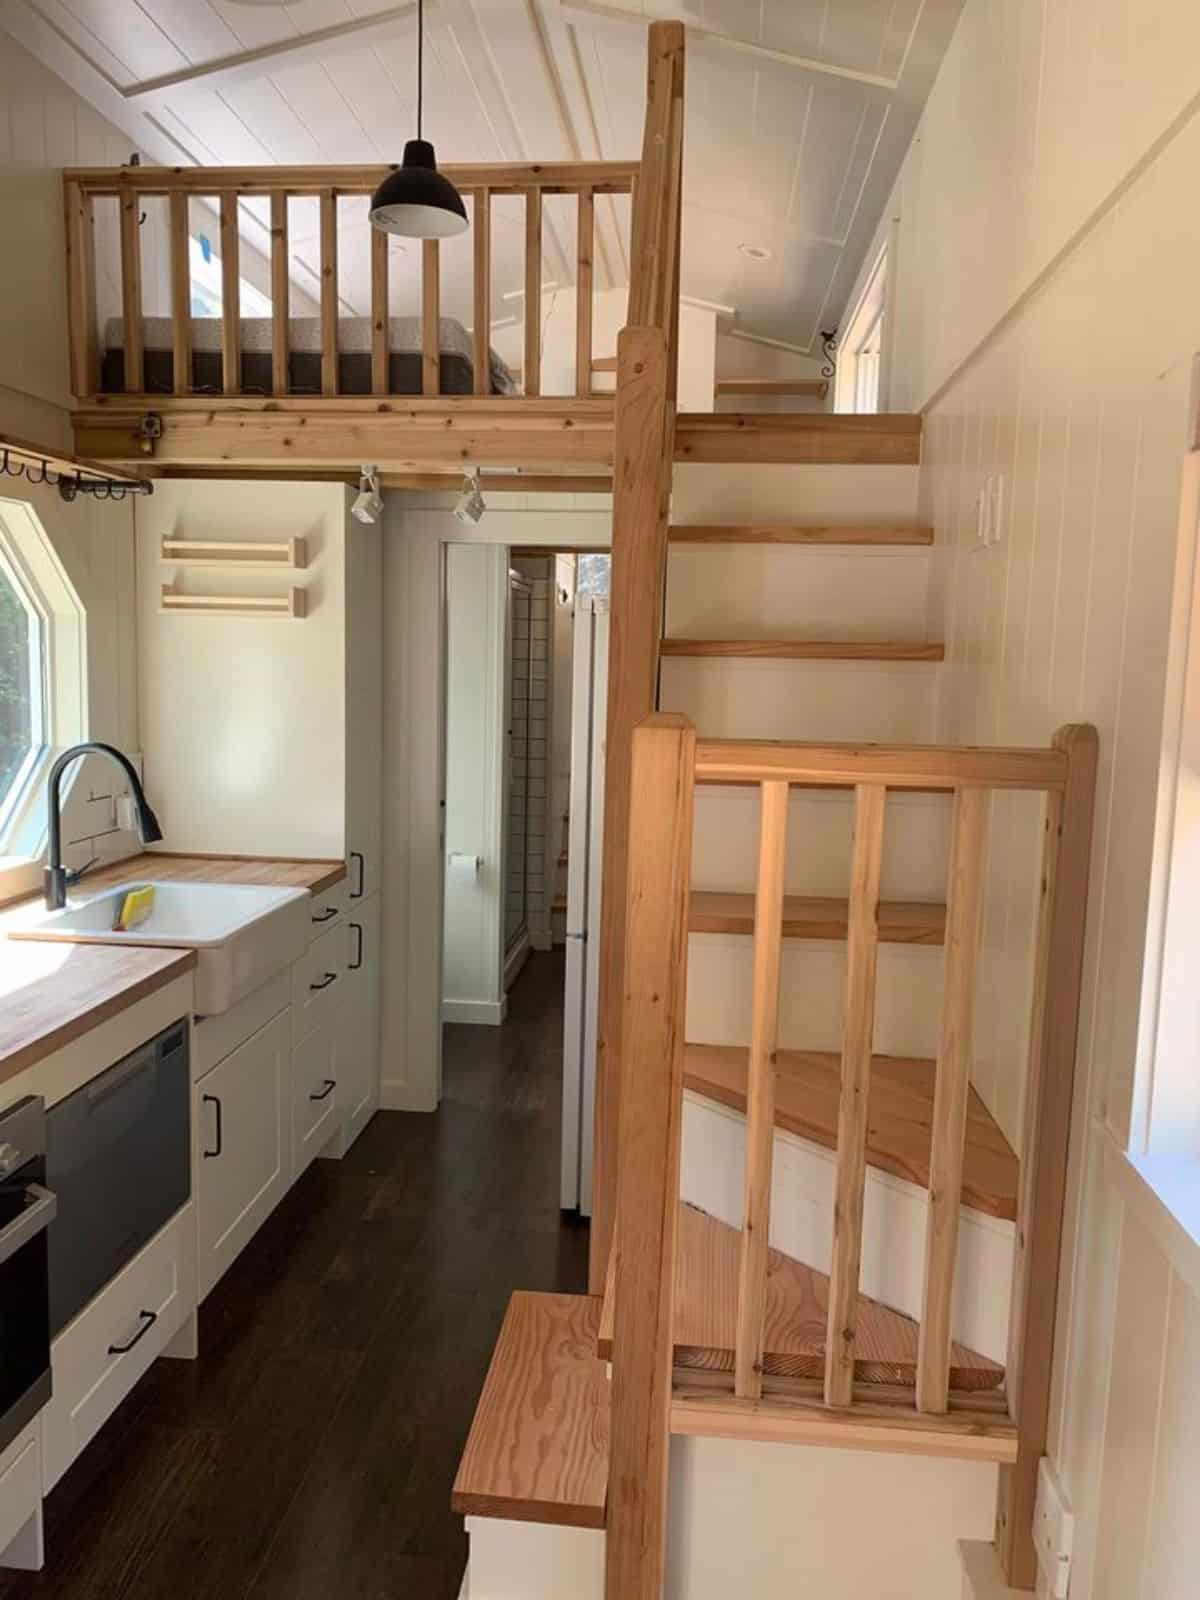 Stairs leading to the loft bedroom of spacious gooseneck tiny house